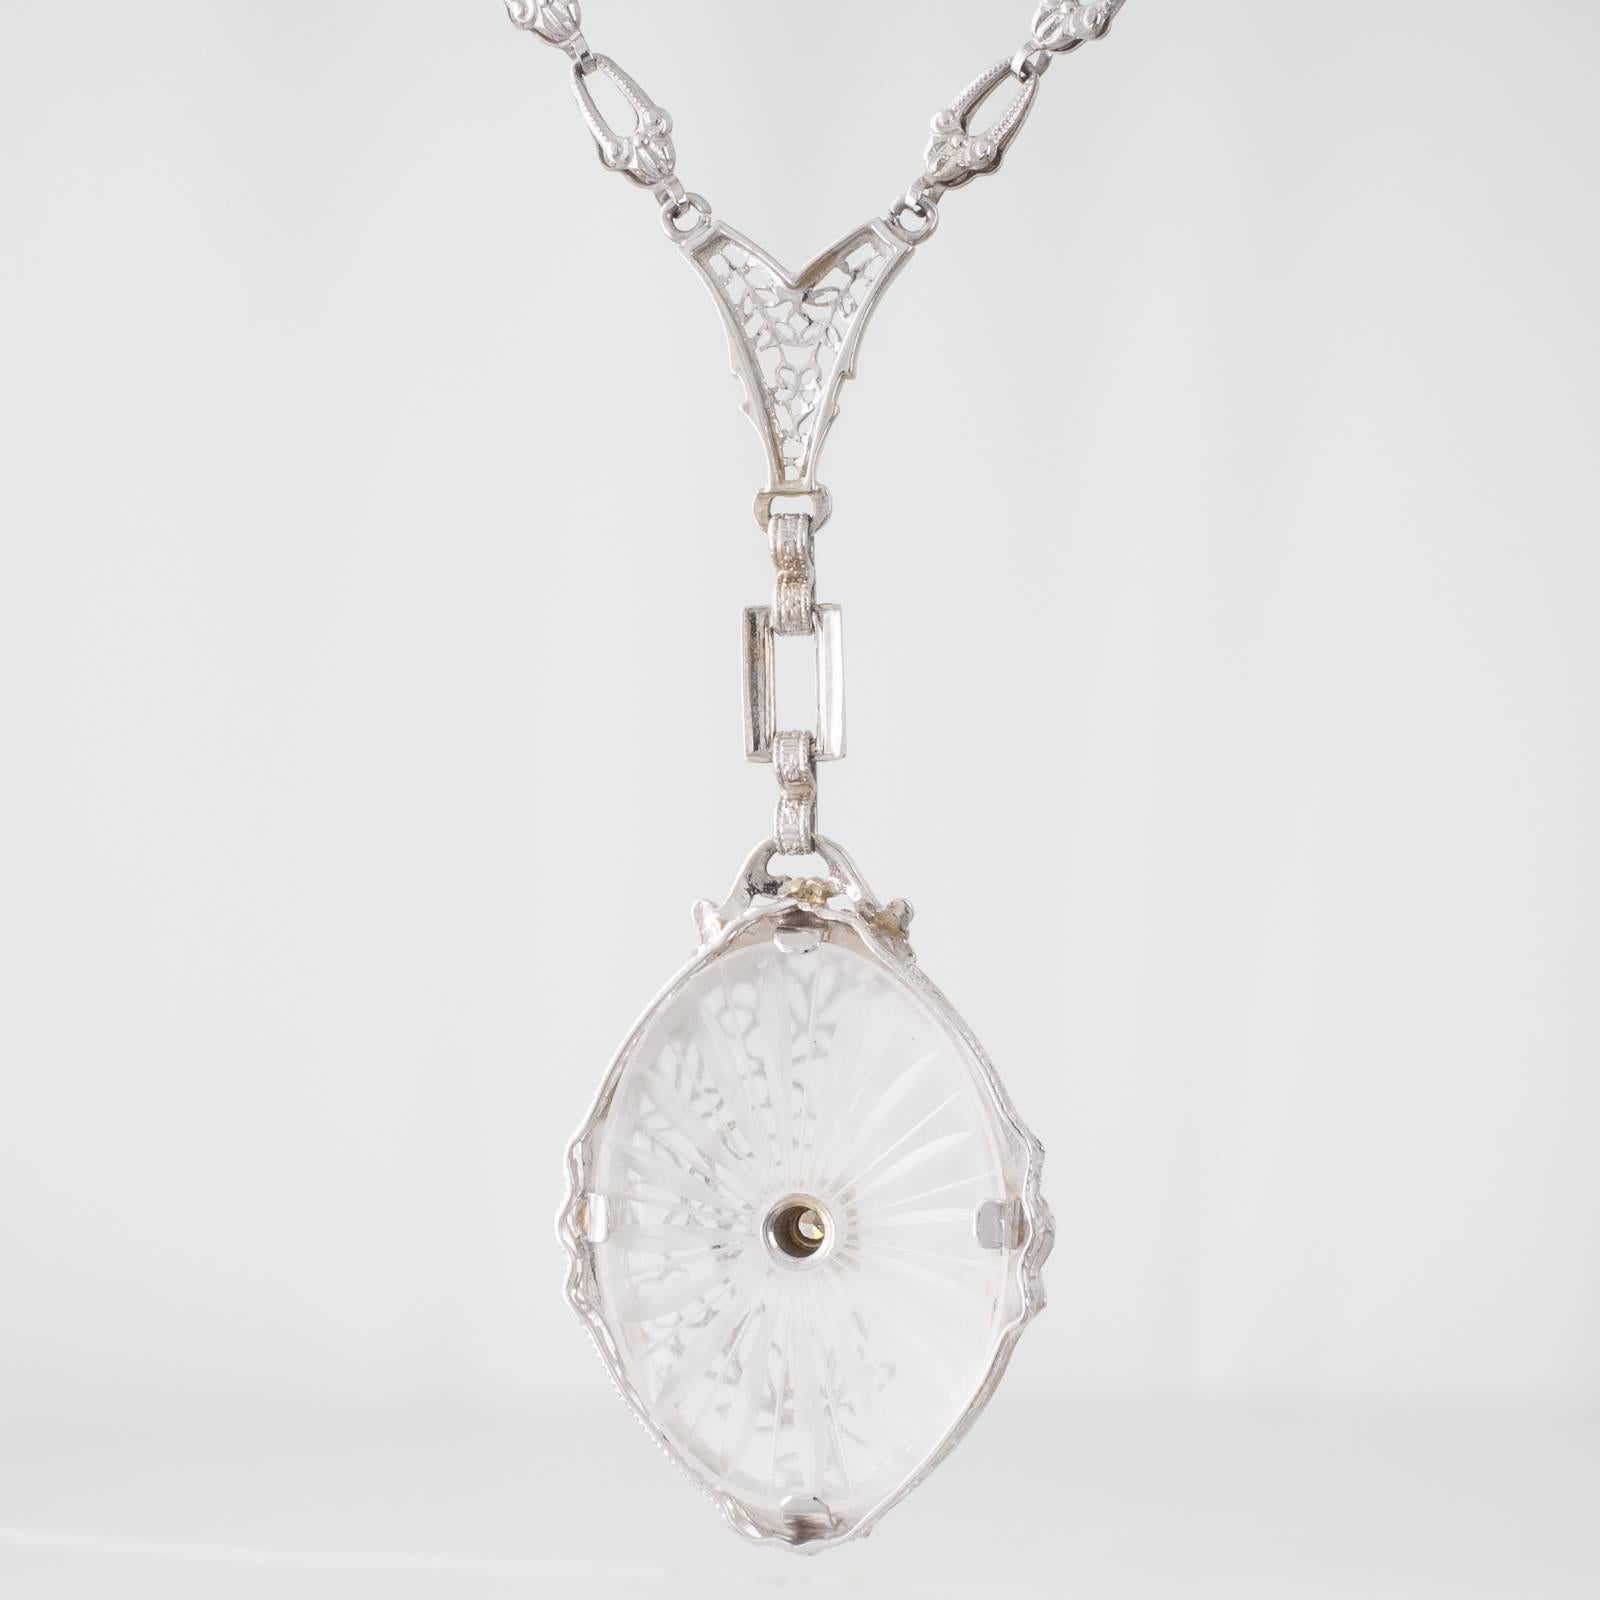 A 14ct white gold Art Deco pendant featuring an oval frosted carved rock crystal plaque grain set to the center with an old cut diamond of estimated 0.03ct, colour J clarity VS, in a box mount. The rock crystal is overlaid to one side with floral